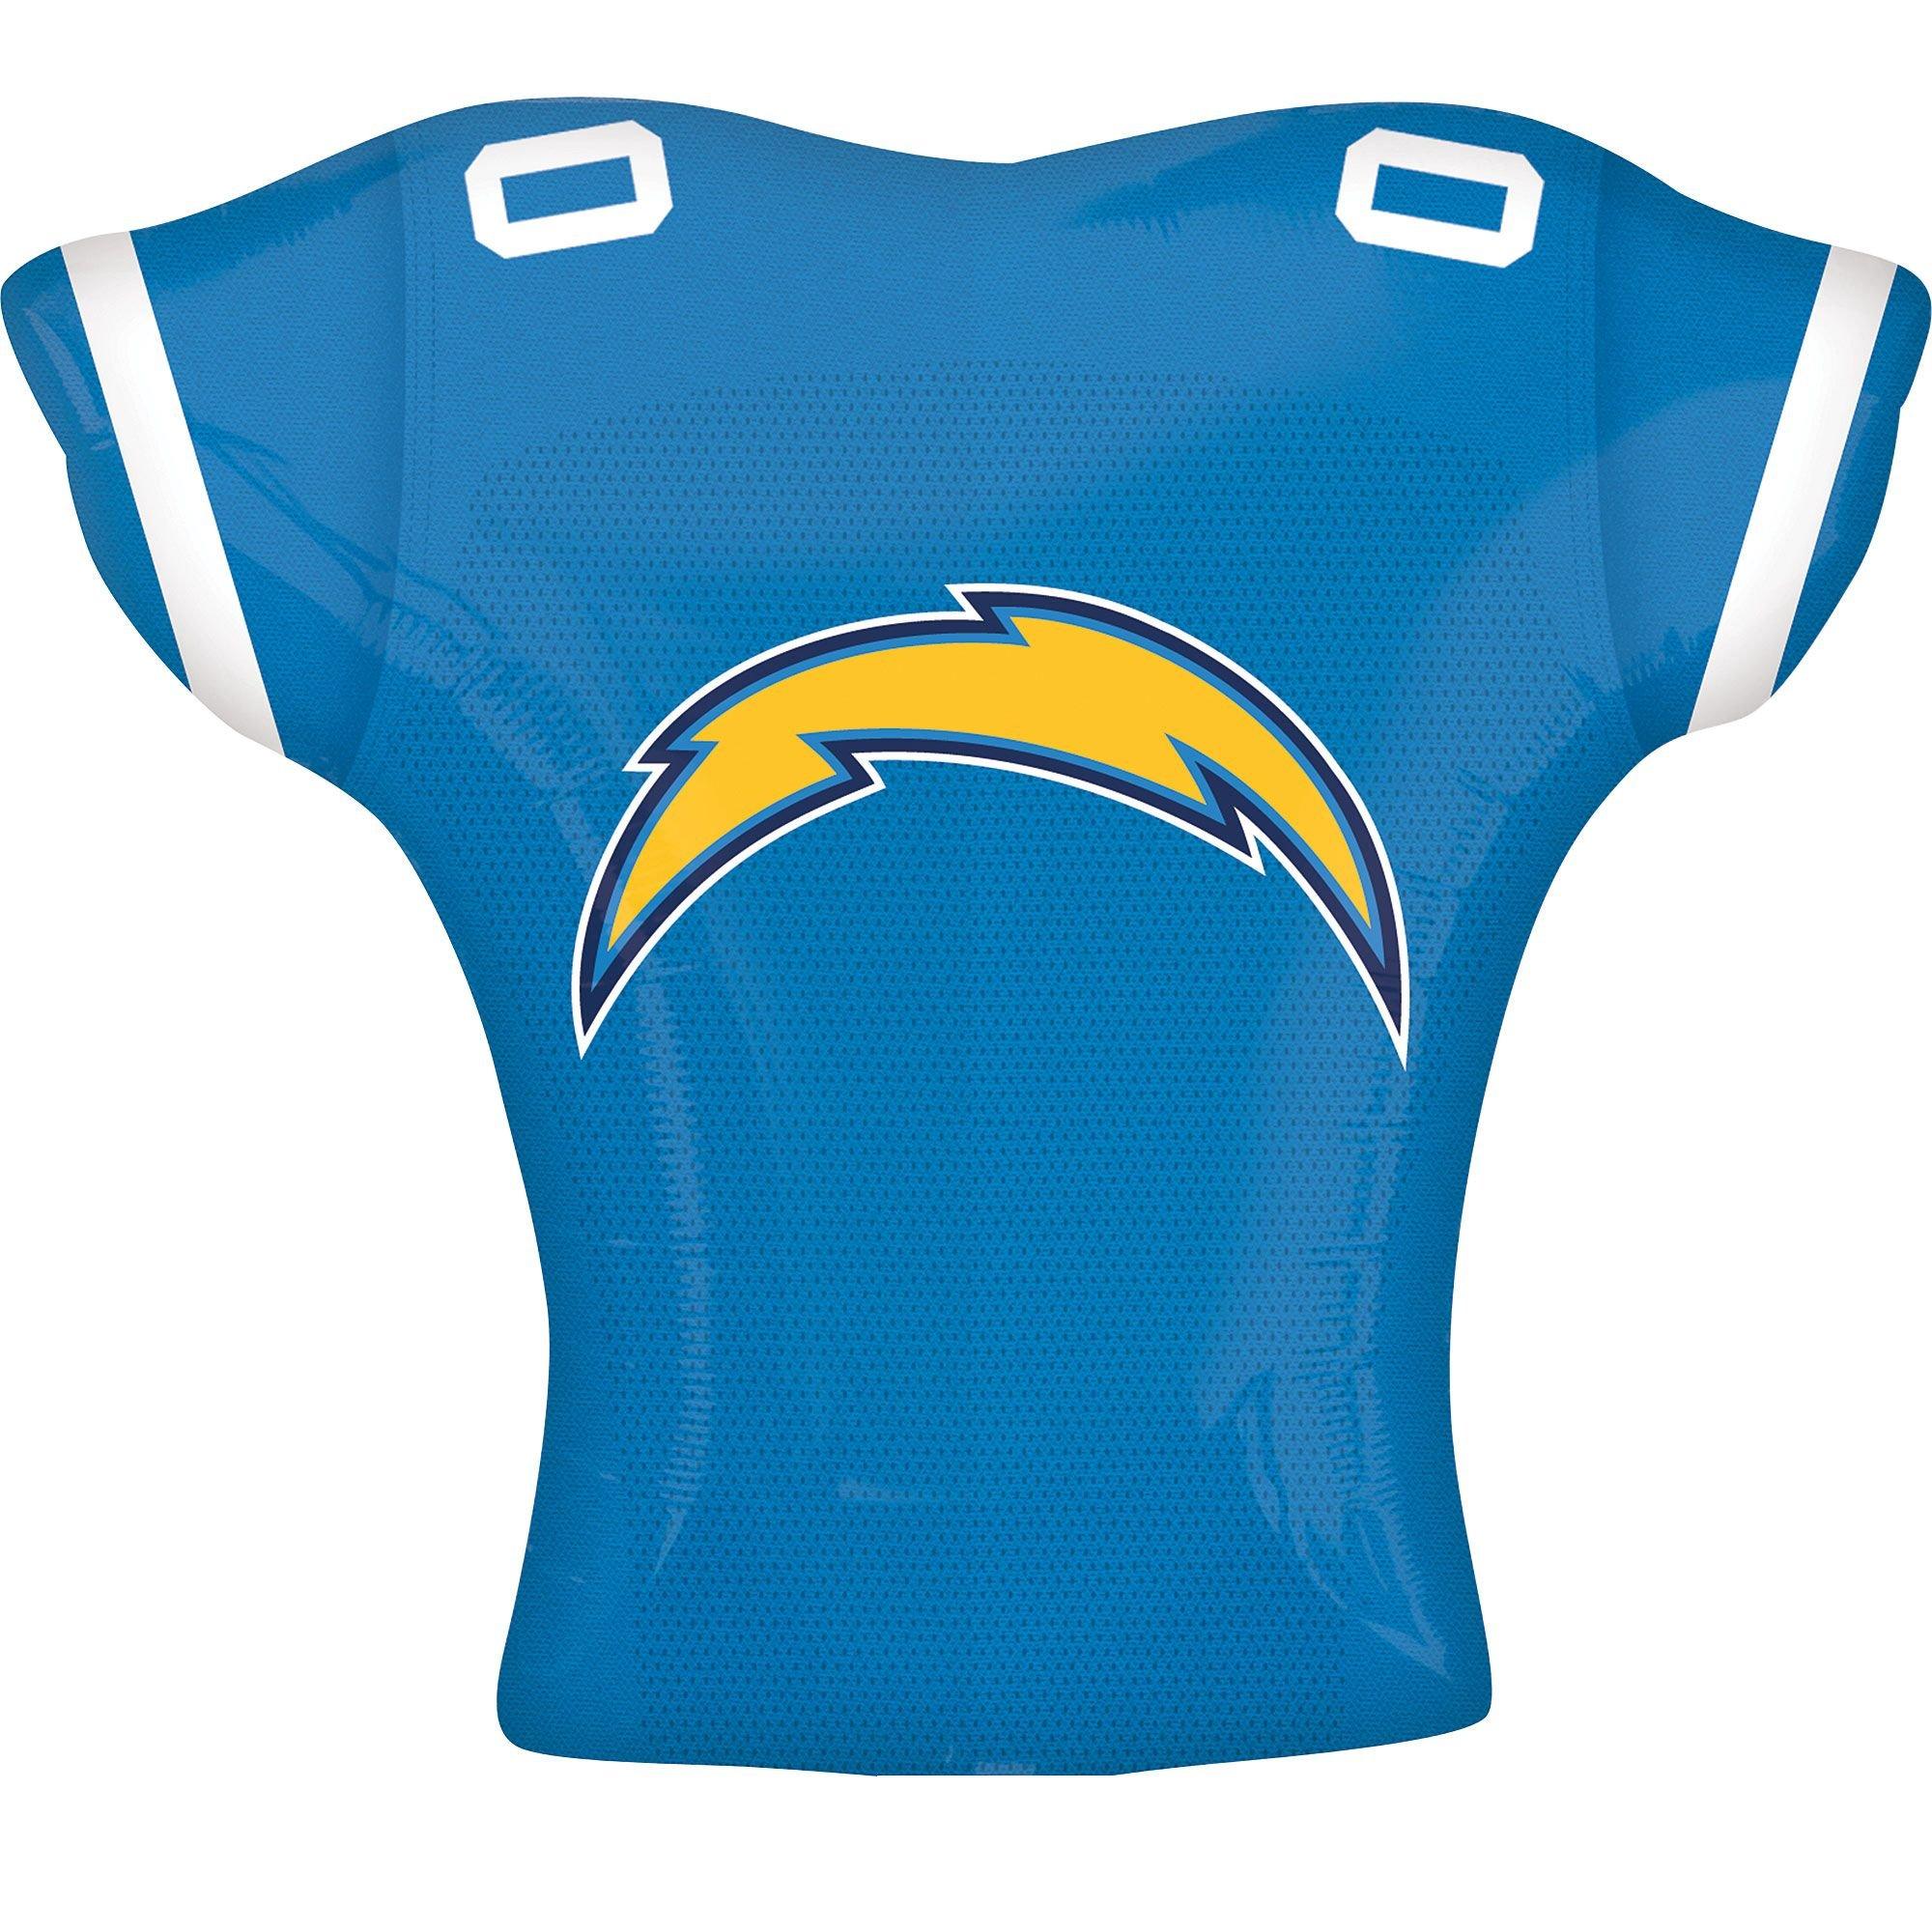 Los Angeles Chargers Balloon 26in x 25in - Jersey